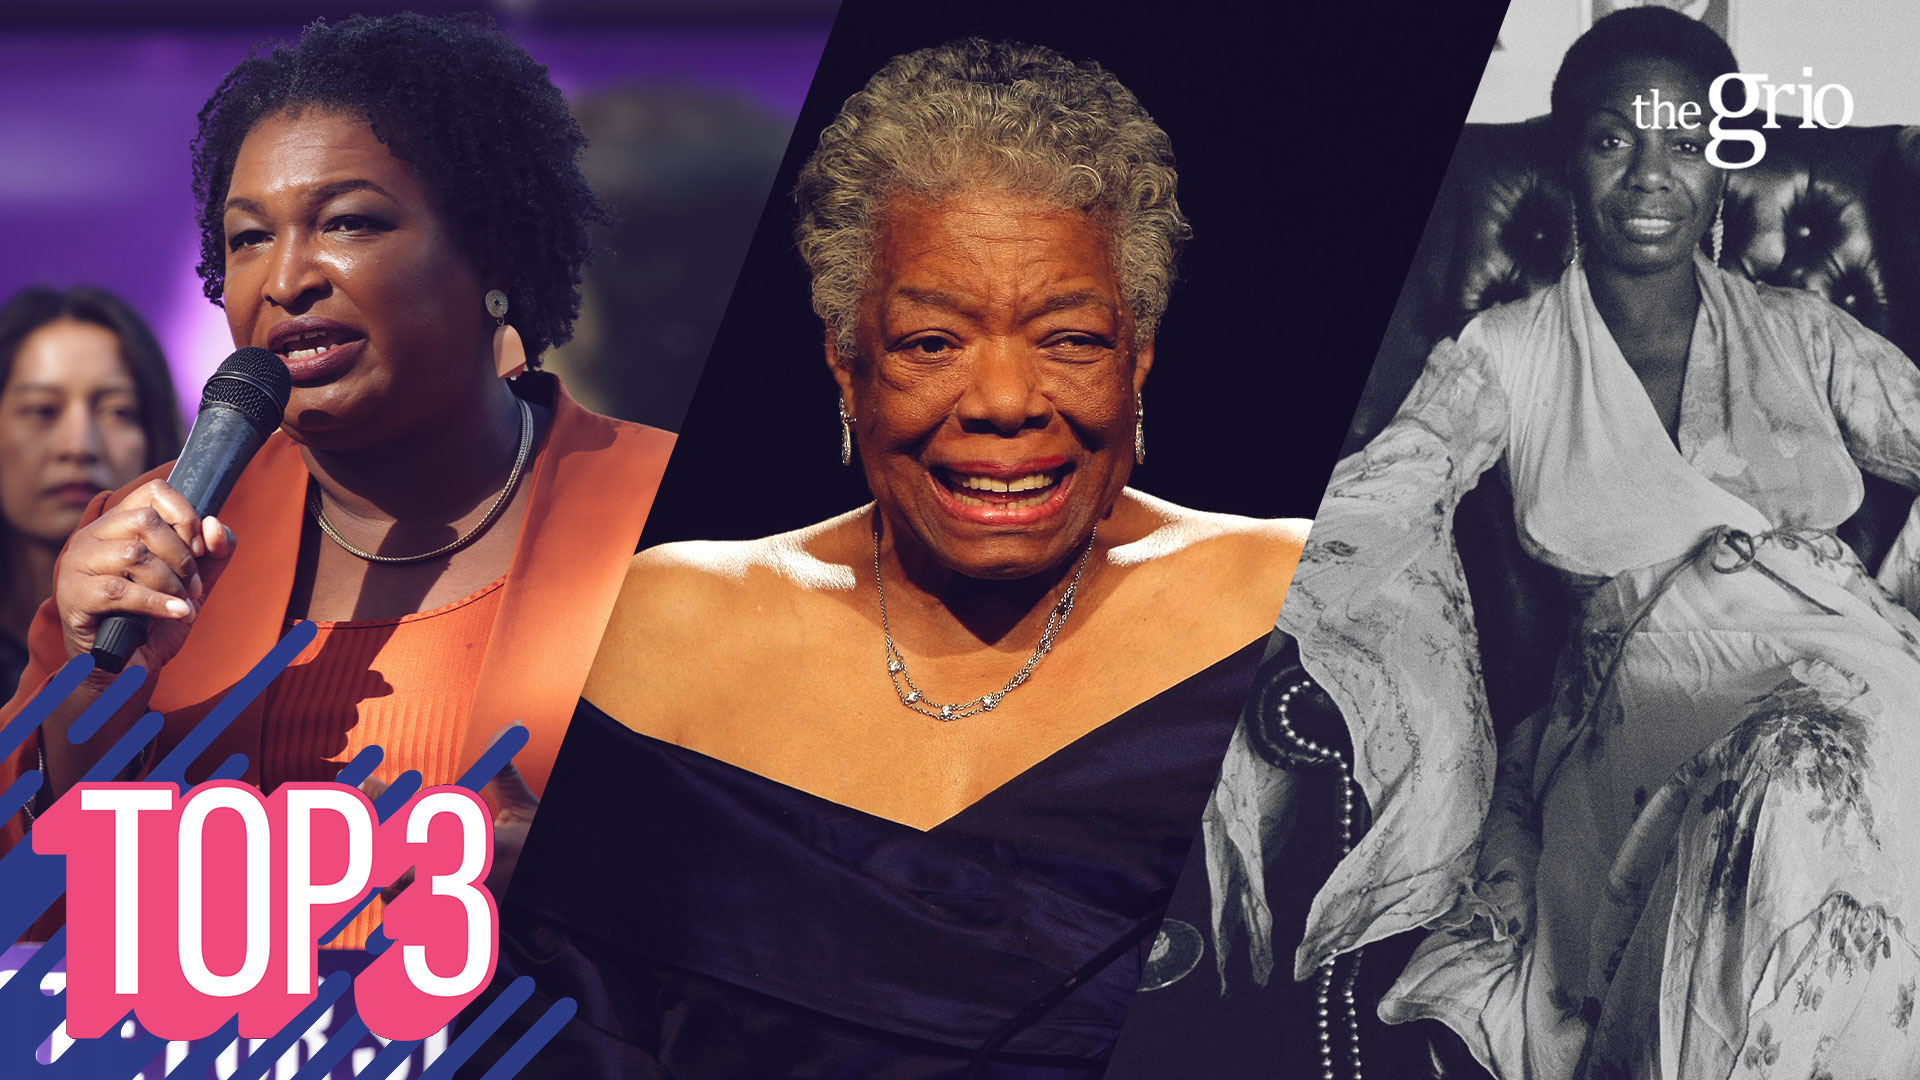 Watch: theGrio Top 3 | Who are the top 3 Black unsung female heroes in Black culture?